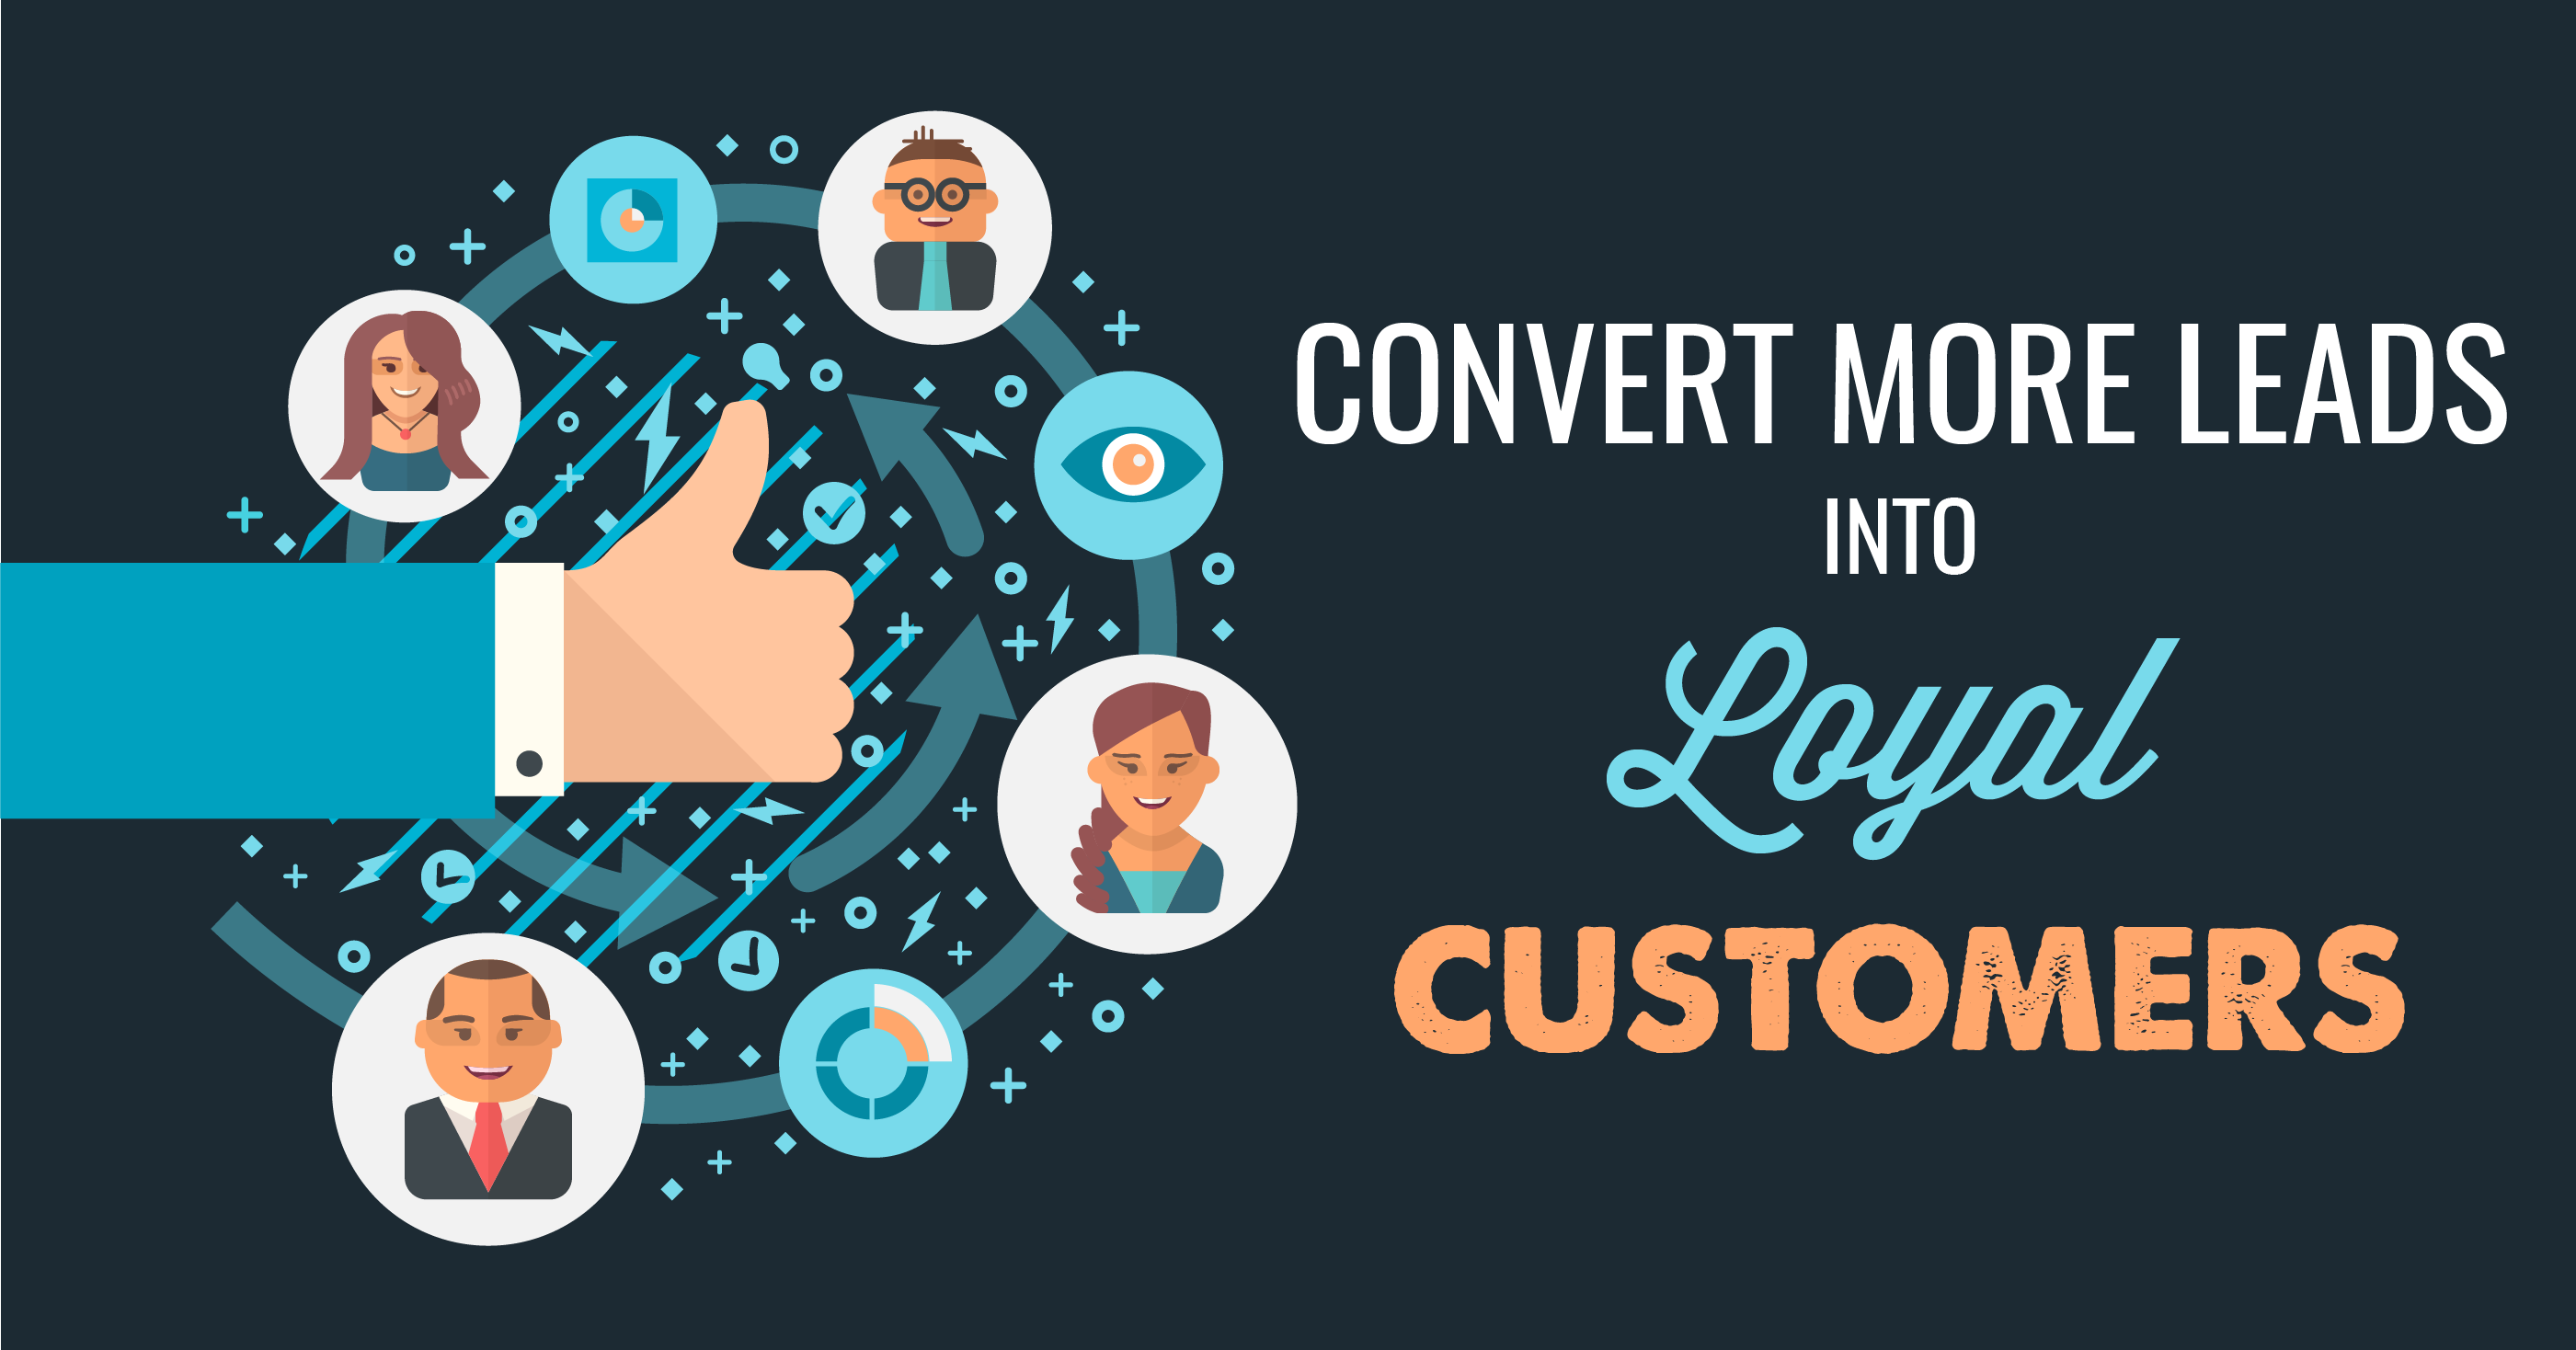 Convert More Leads into Loyal Customers